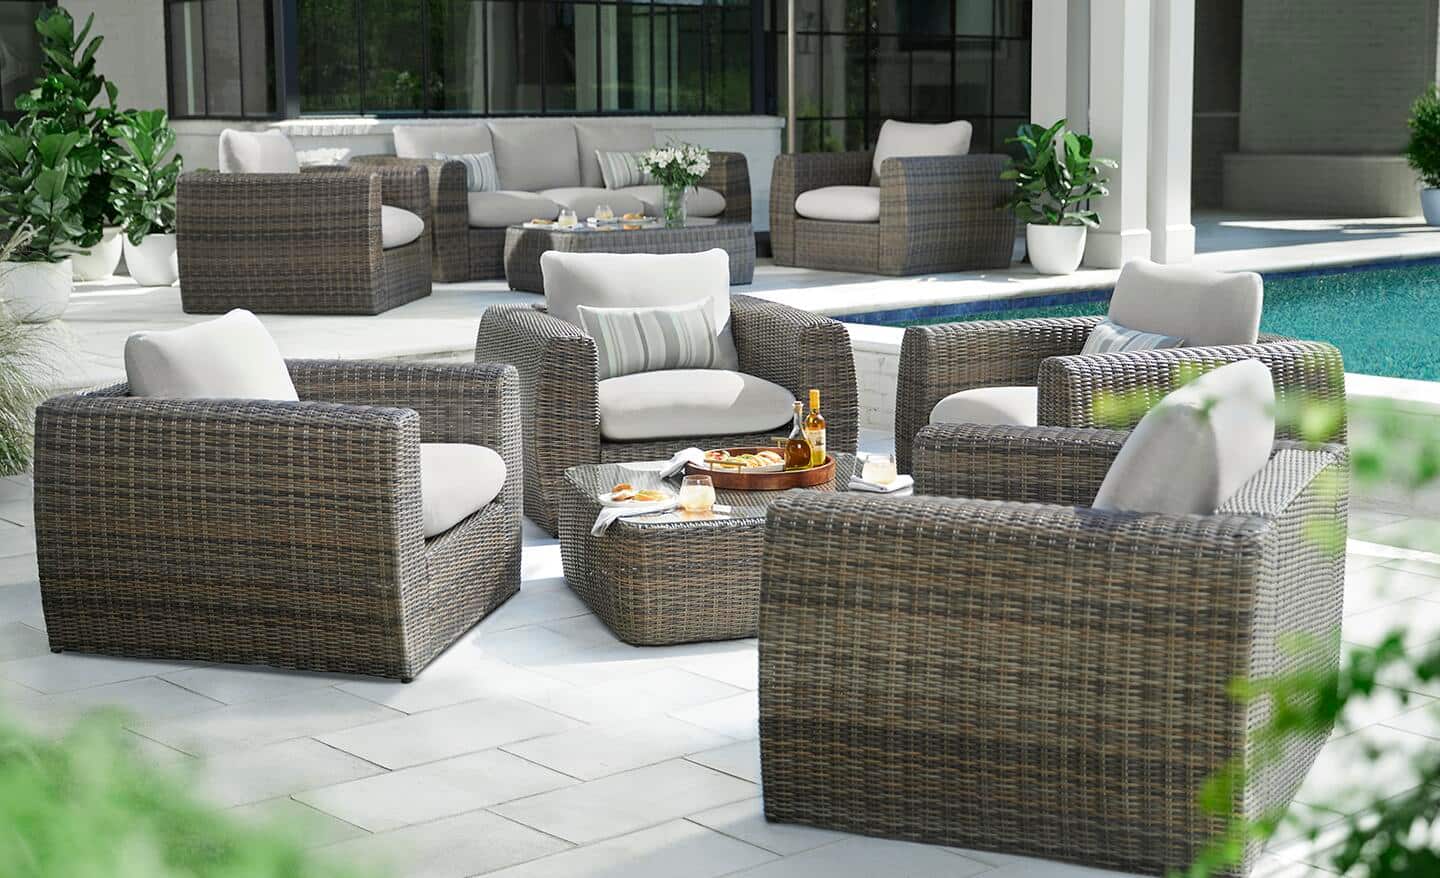 Four outdoor lounge chairs surround a matching gray coffee table on a deck near a pool.